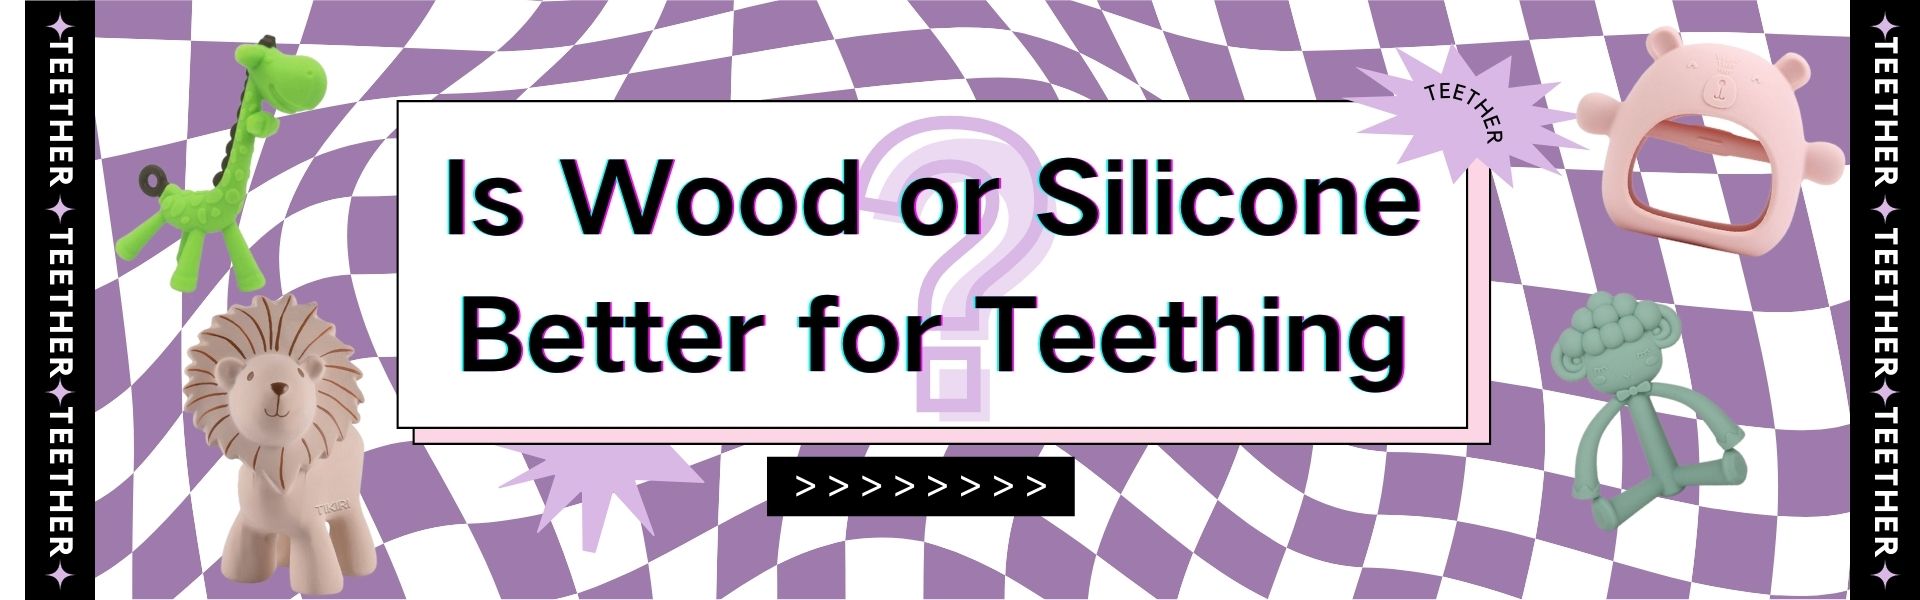 Is Wood or Silicone Better for Teething?